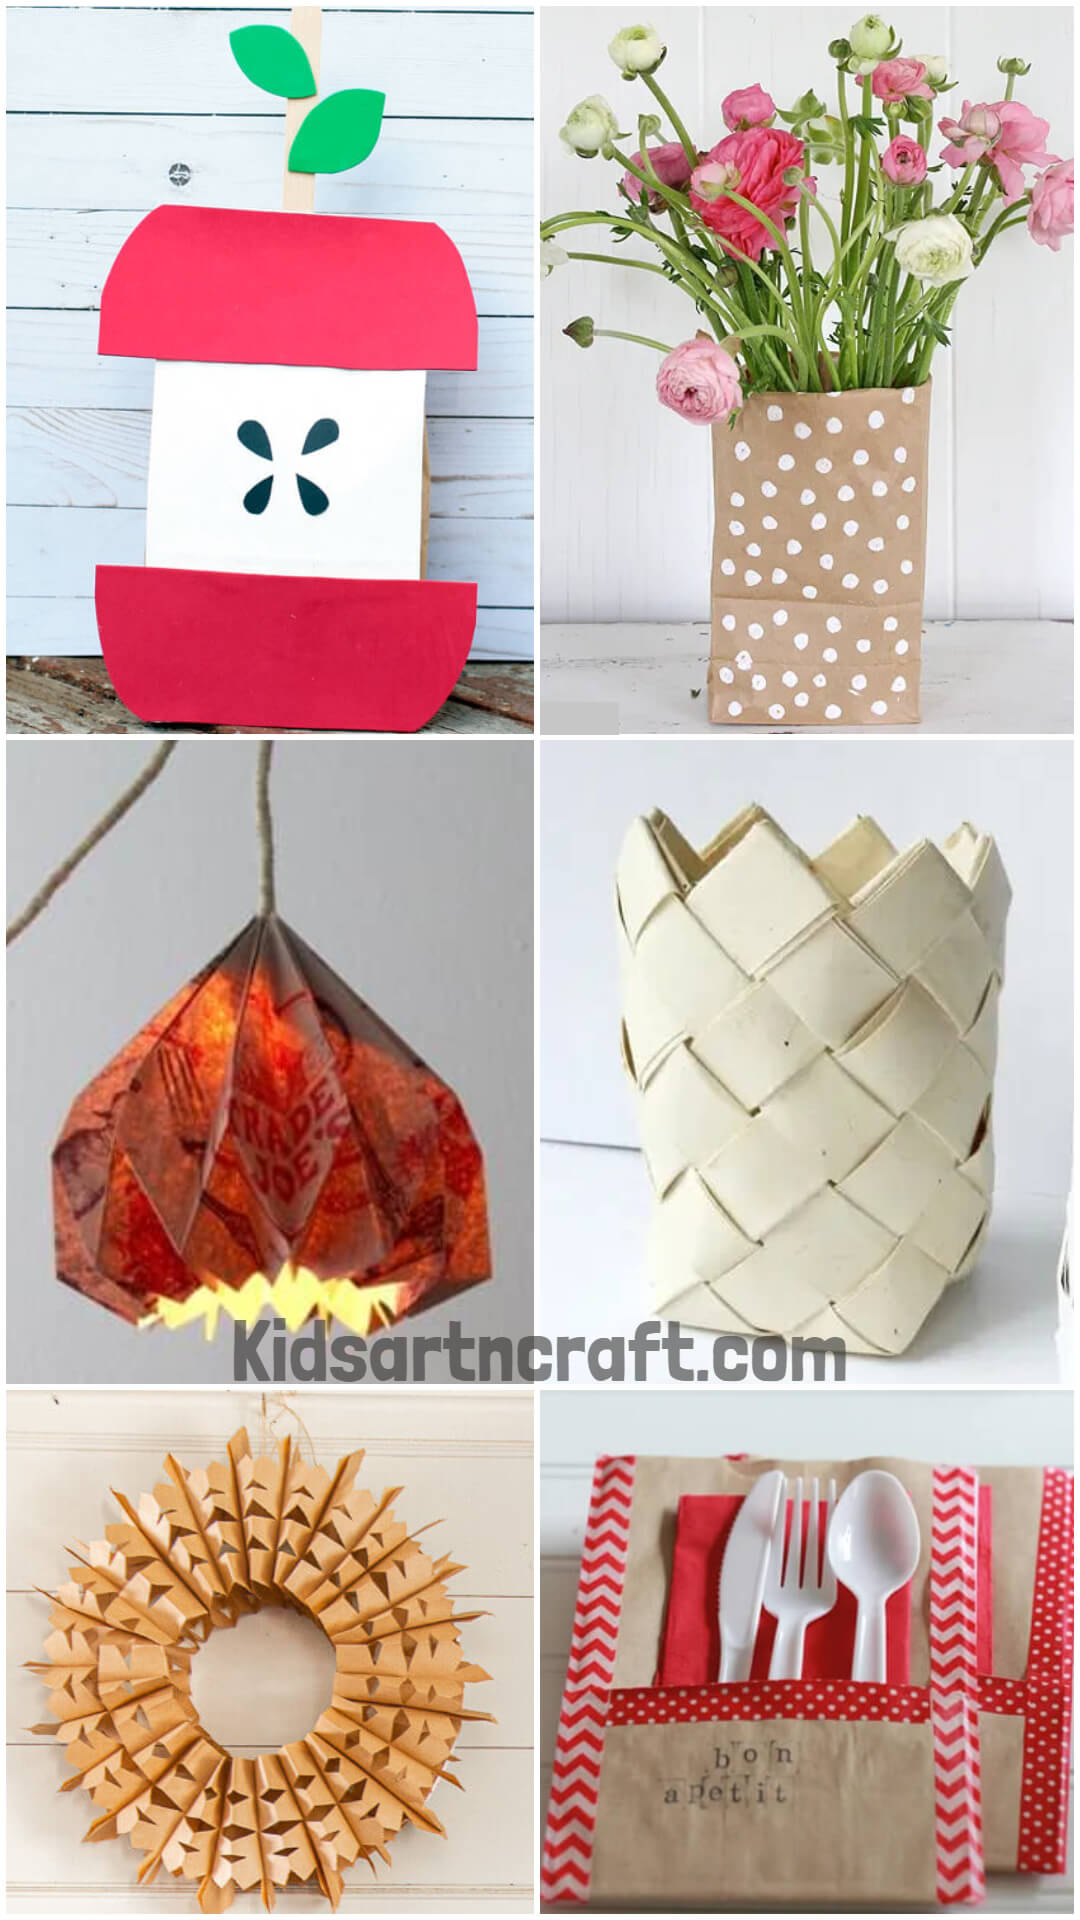 Creative Uses for Paper Bag